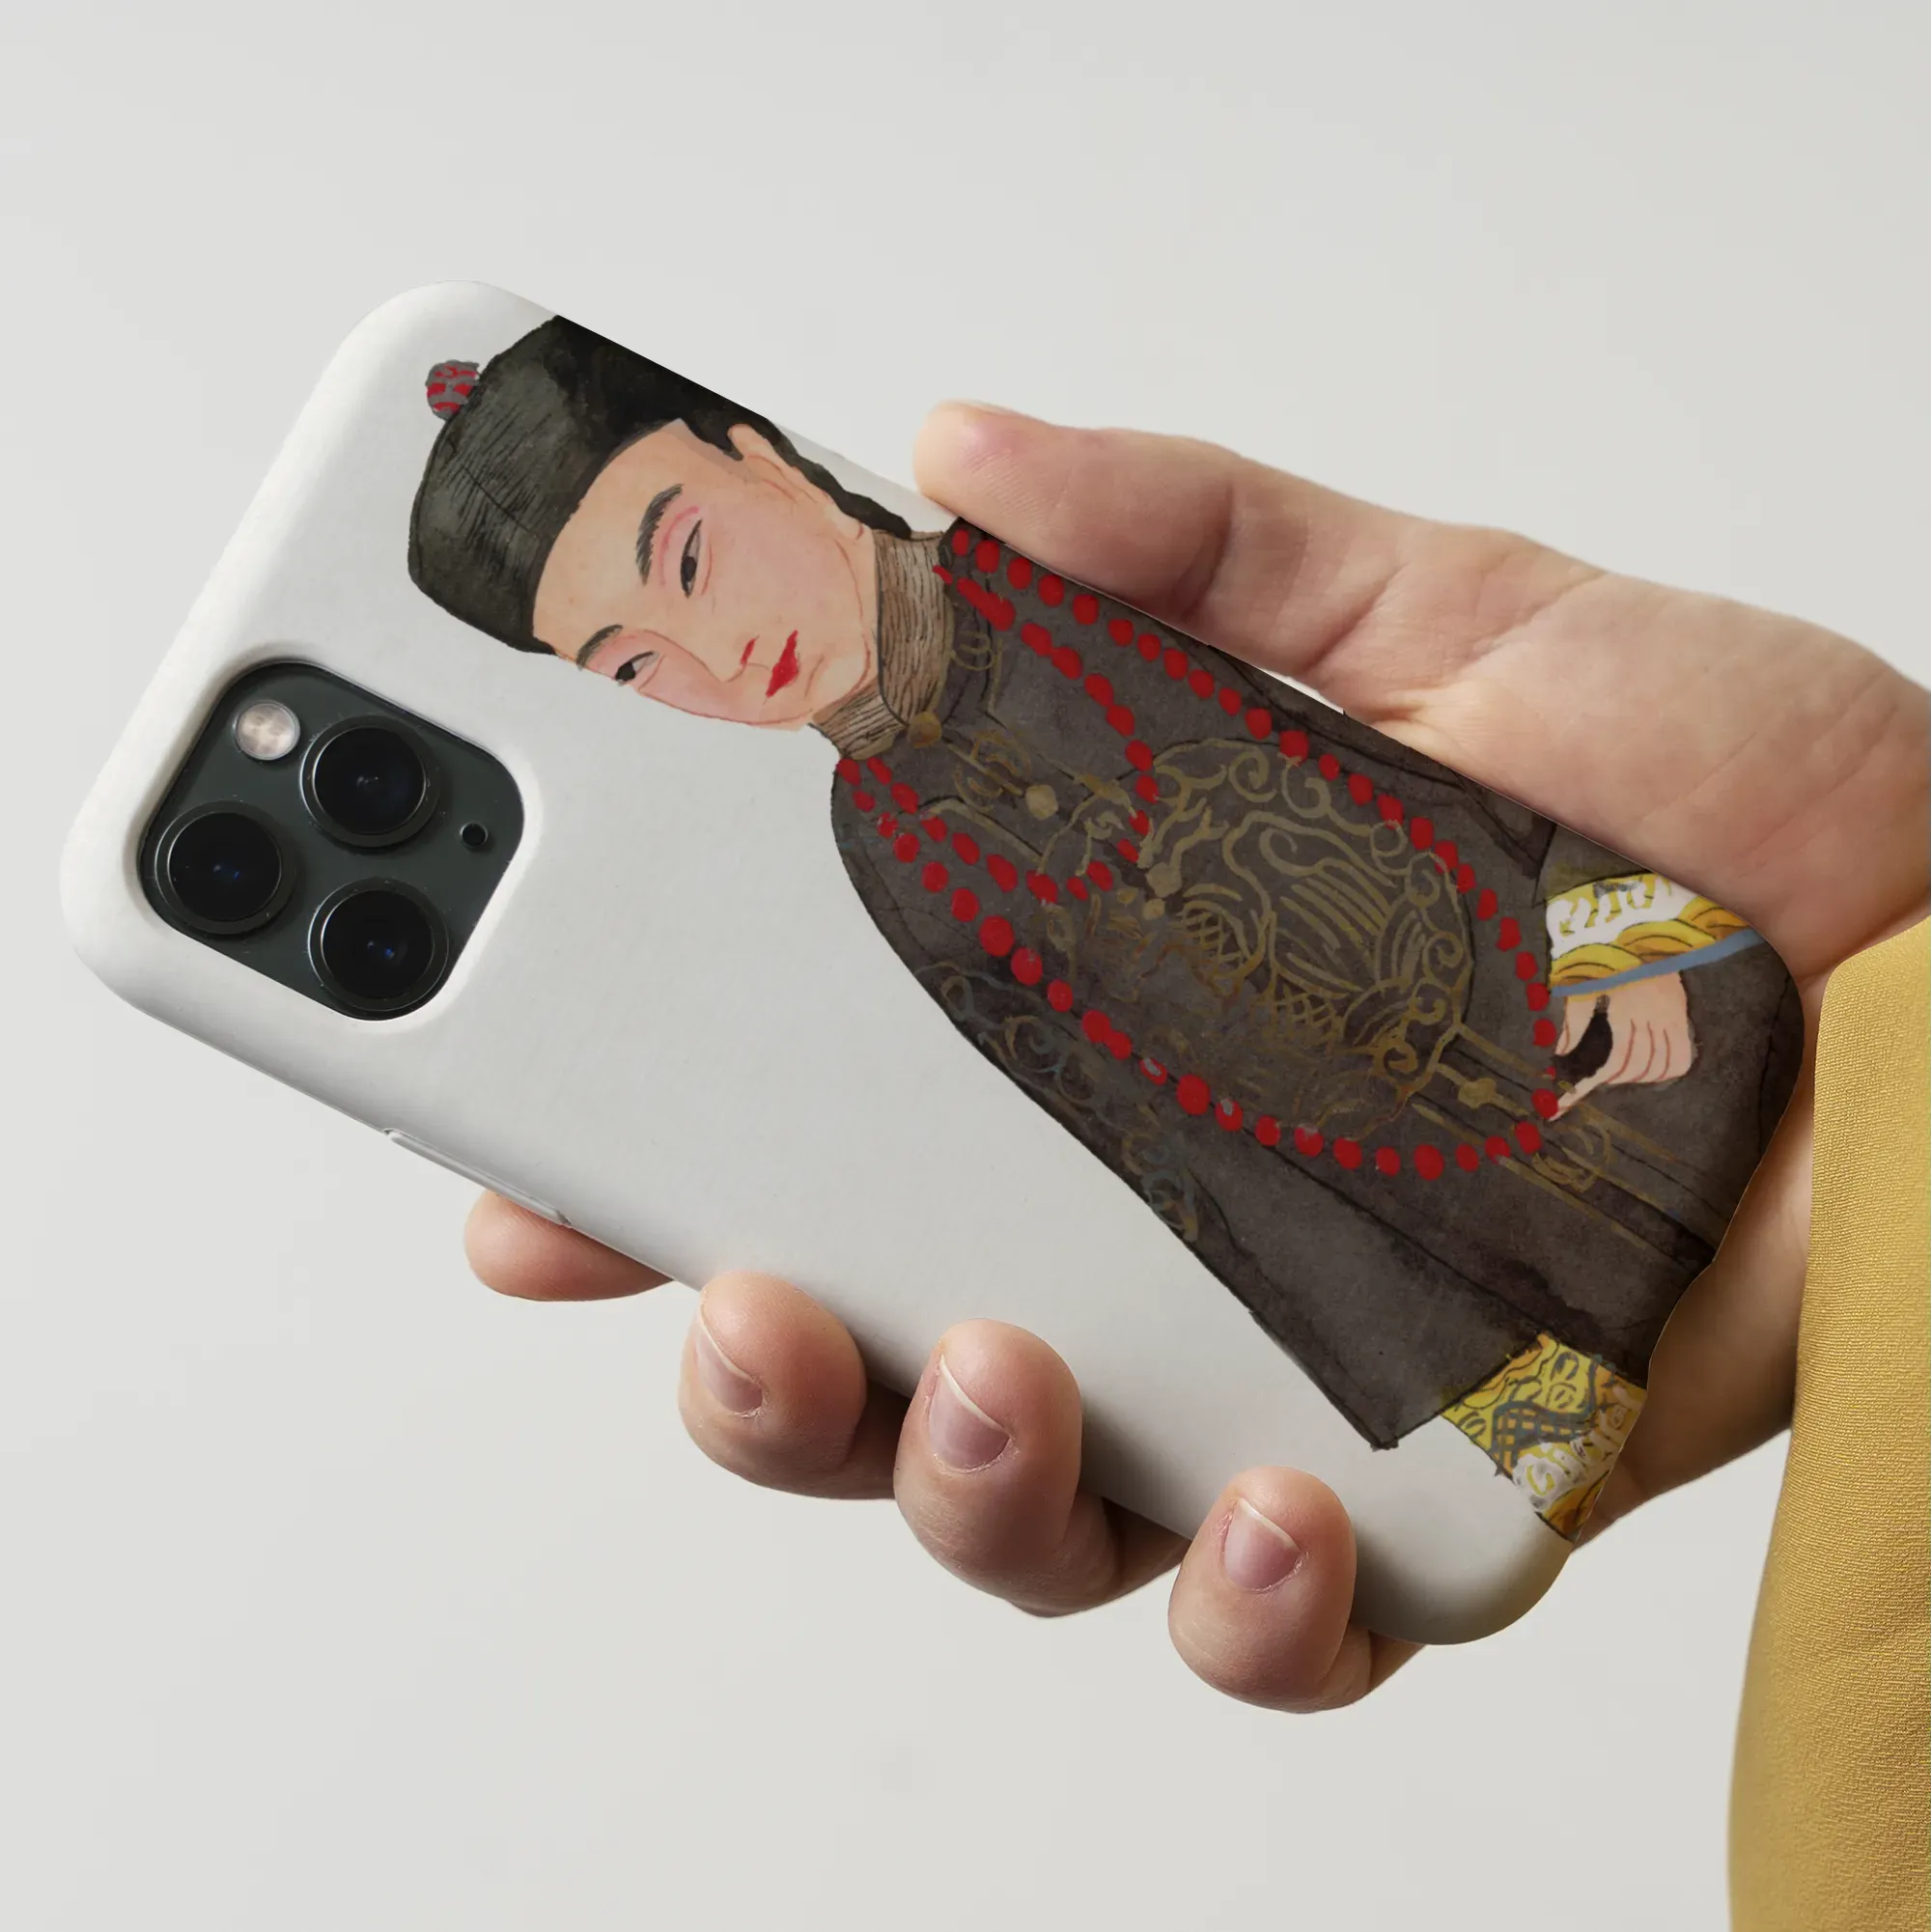 Emperor’s Courtier - Chinese Manchu Aesthetic Art Phone Case - Mobile Phone Cases - Aesthetic Art